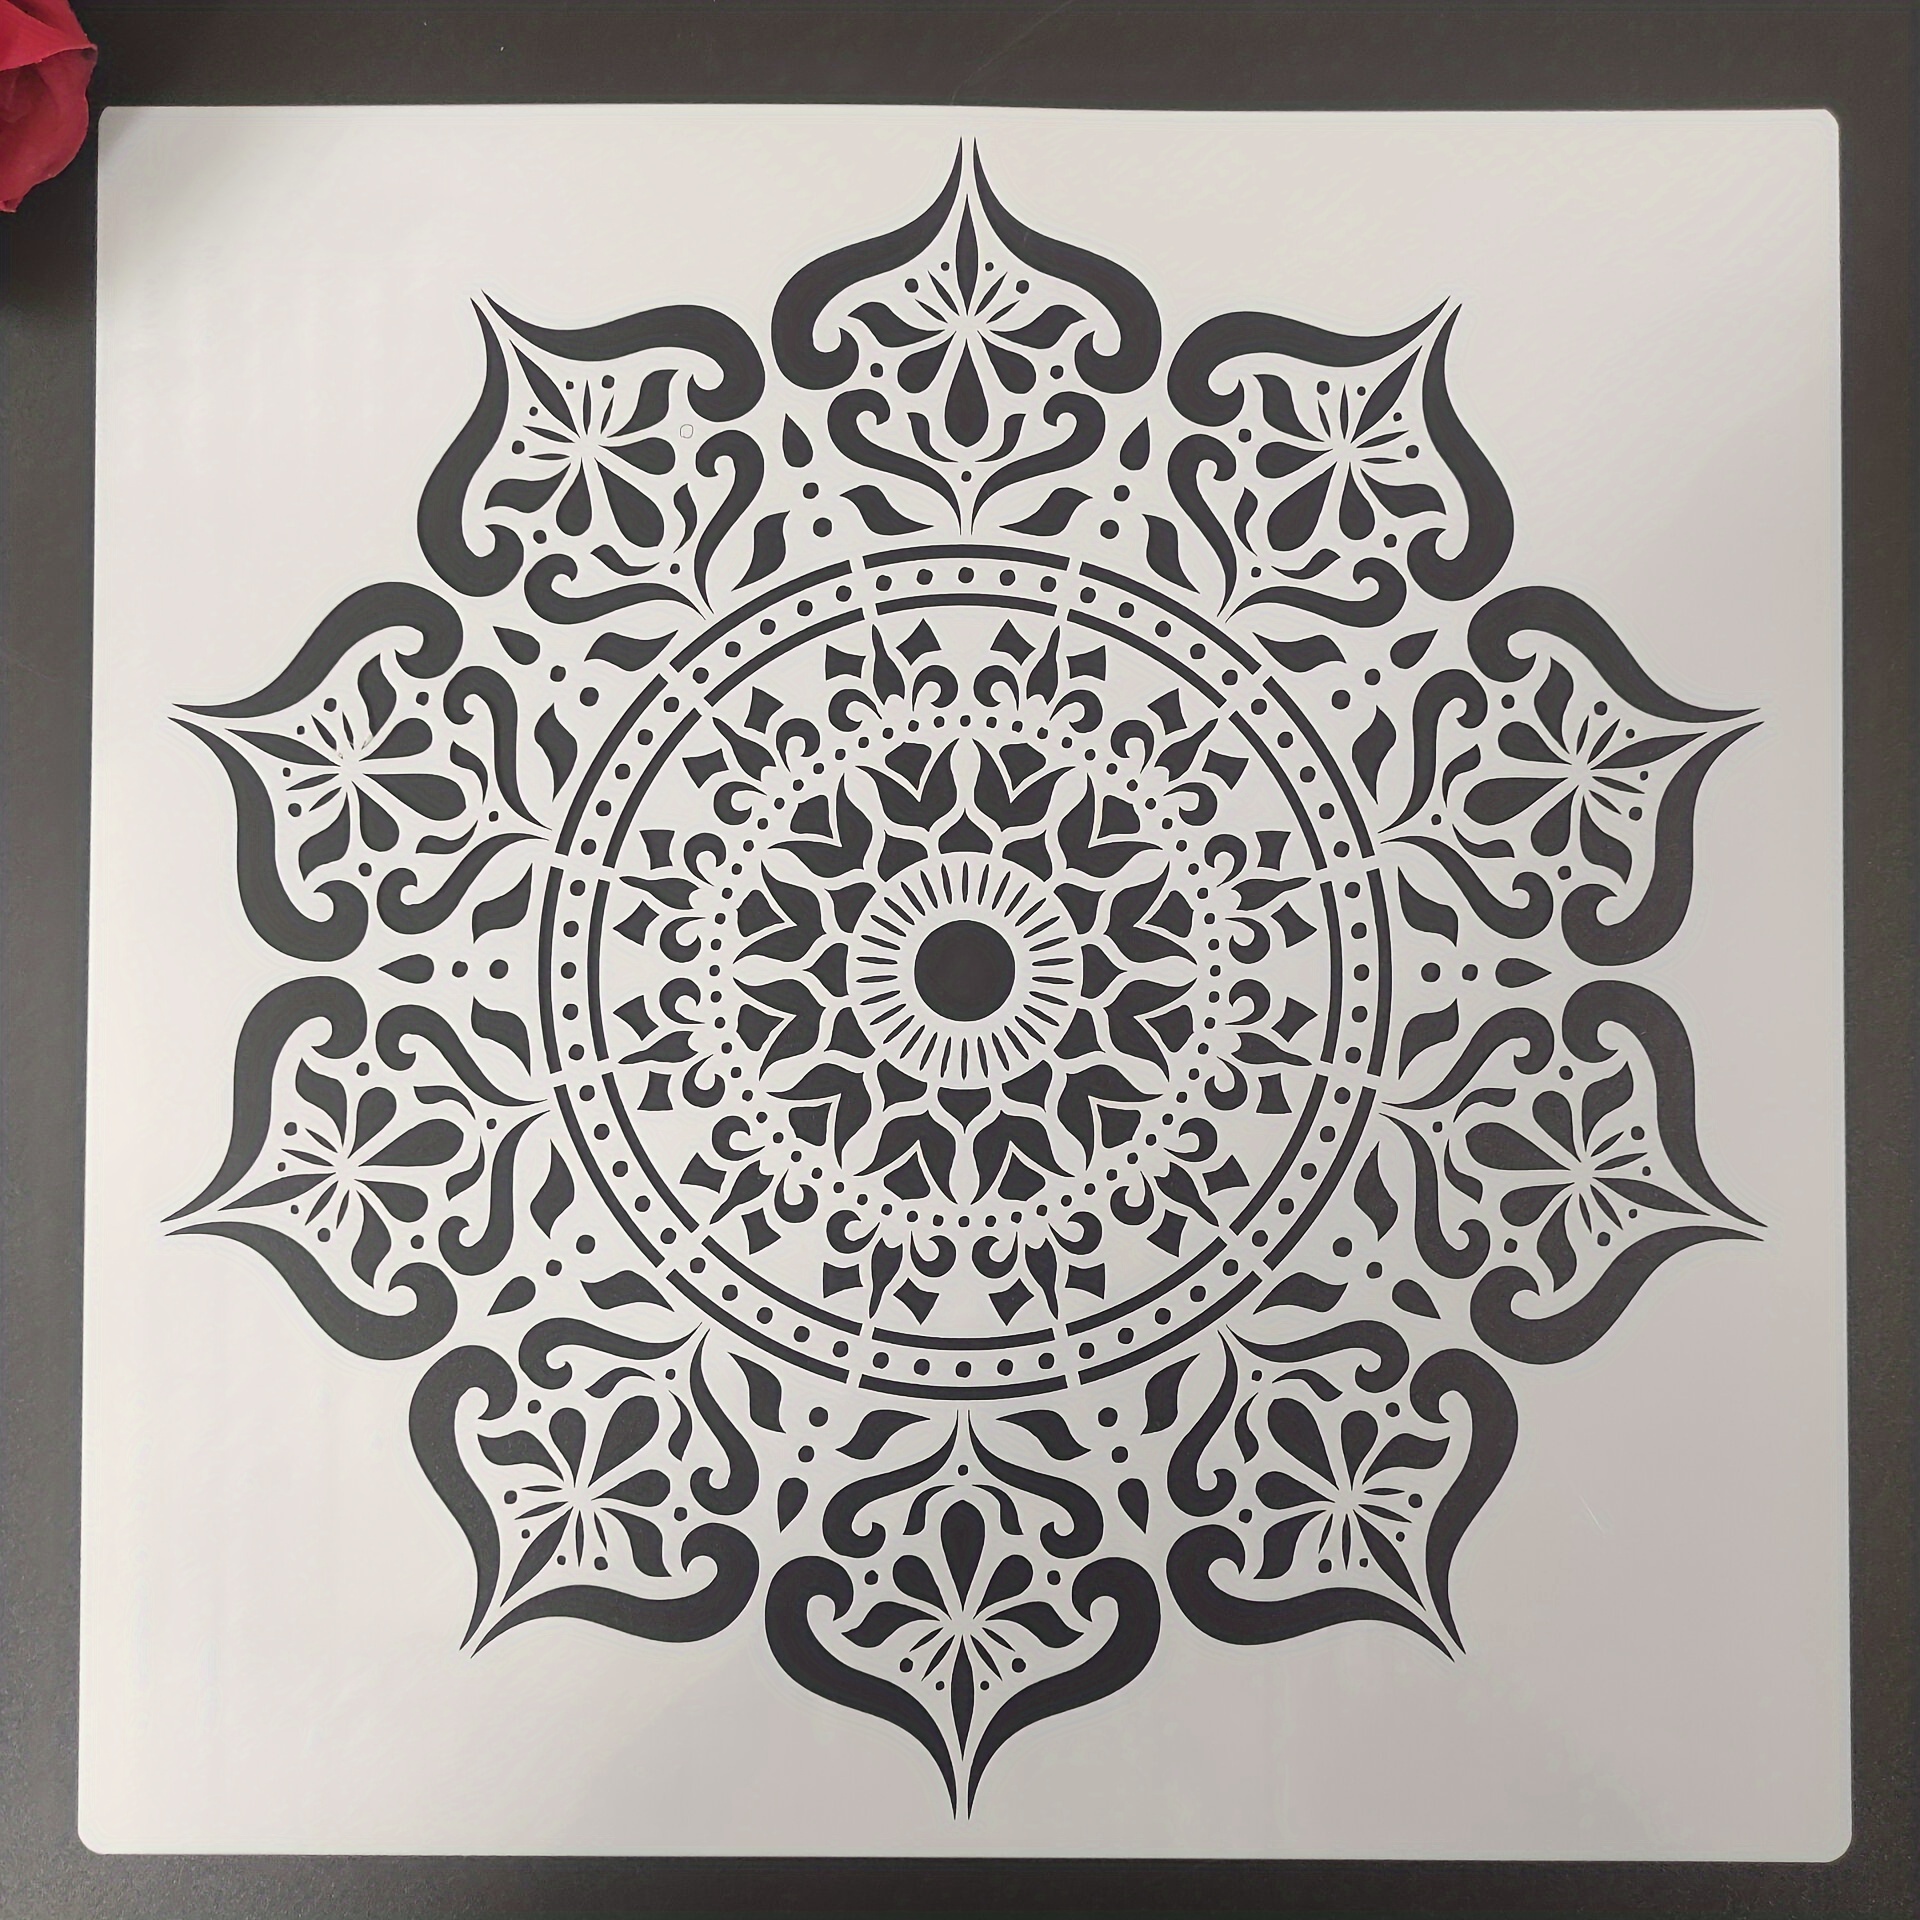 

Penhuamoban 30cm Mandala Stencil Template For Diy Art Projects On Wood, Fabric, Walls, And Floors - Plastic Craft Supplies For Stamp Embossing And Paper Cards